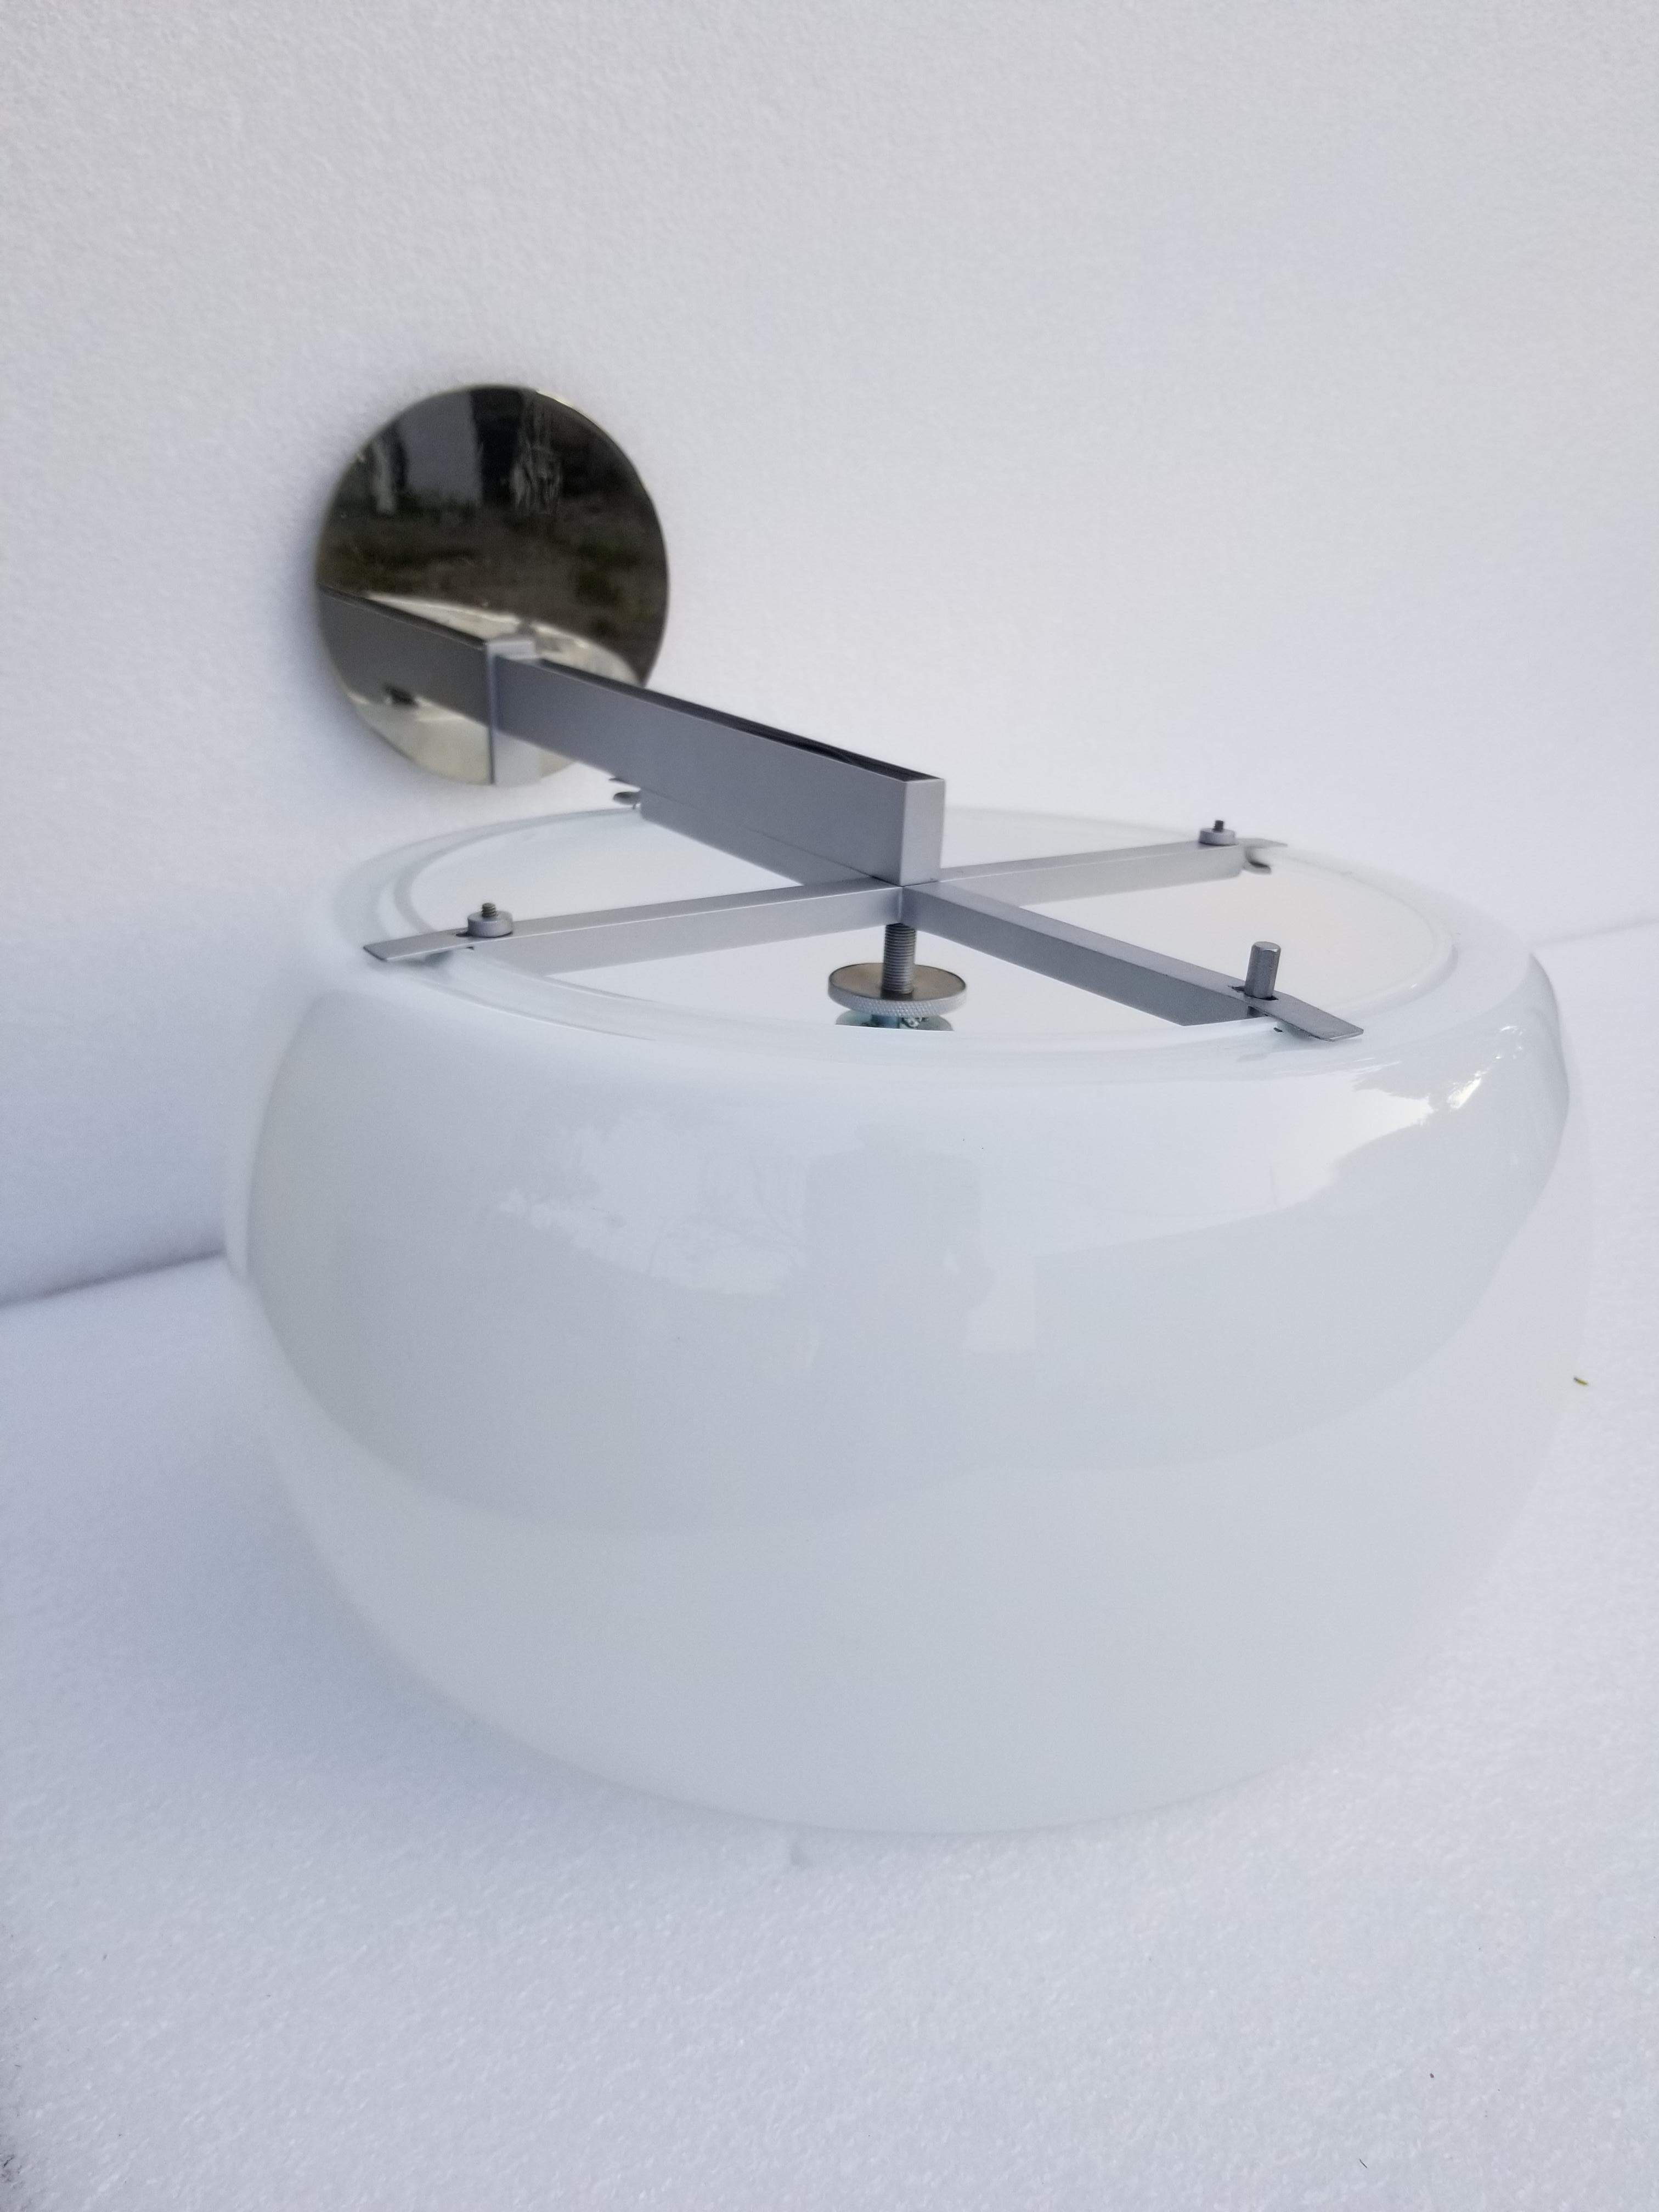 Pair of Vico Magistretti for Artremide wall sconces.
Made in Italy, early production circa 1961.
Nickel-plated frame and opaline round glass
Restored and US rewired, new 100 watt max socket
Measures: Back plate diameter 6 inches
Have a look at